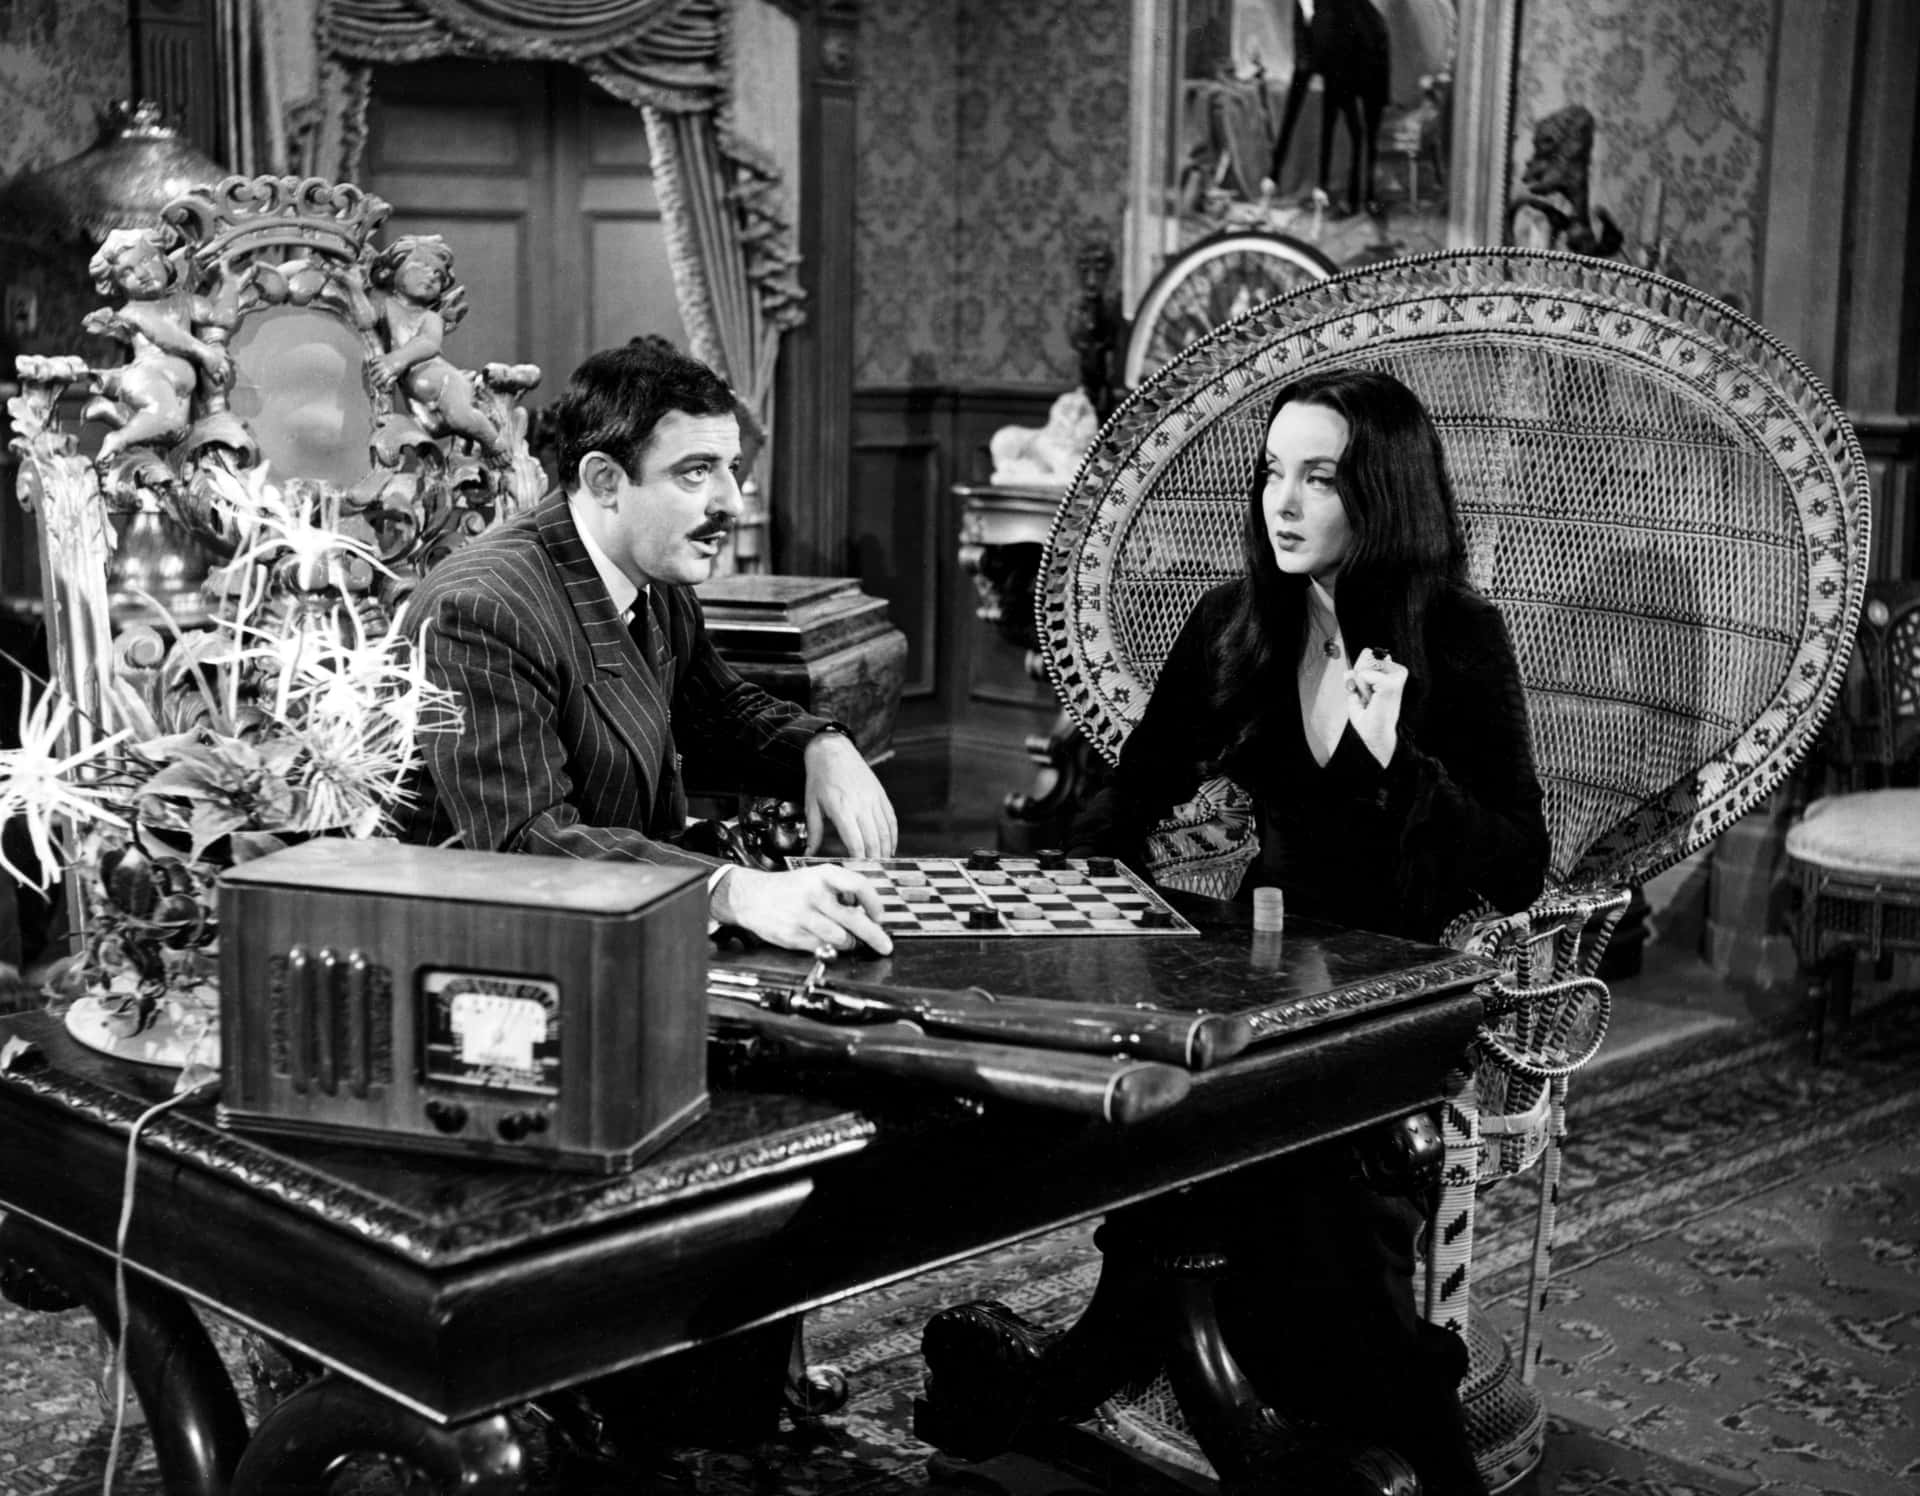 The Addams Family - A Black And White Photo